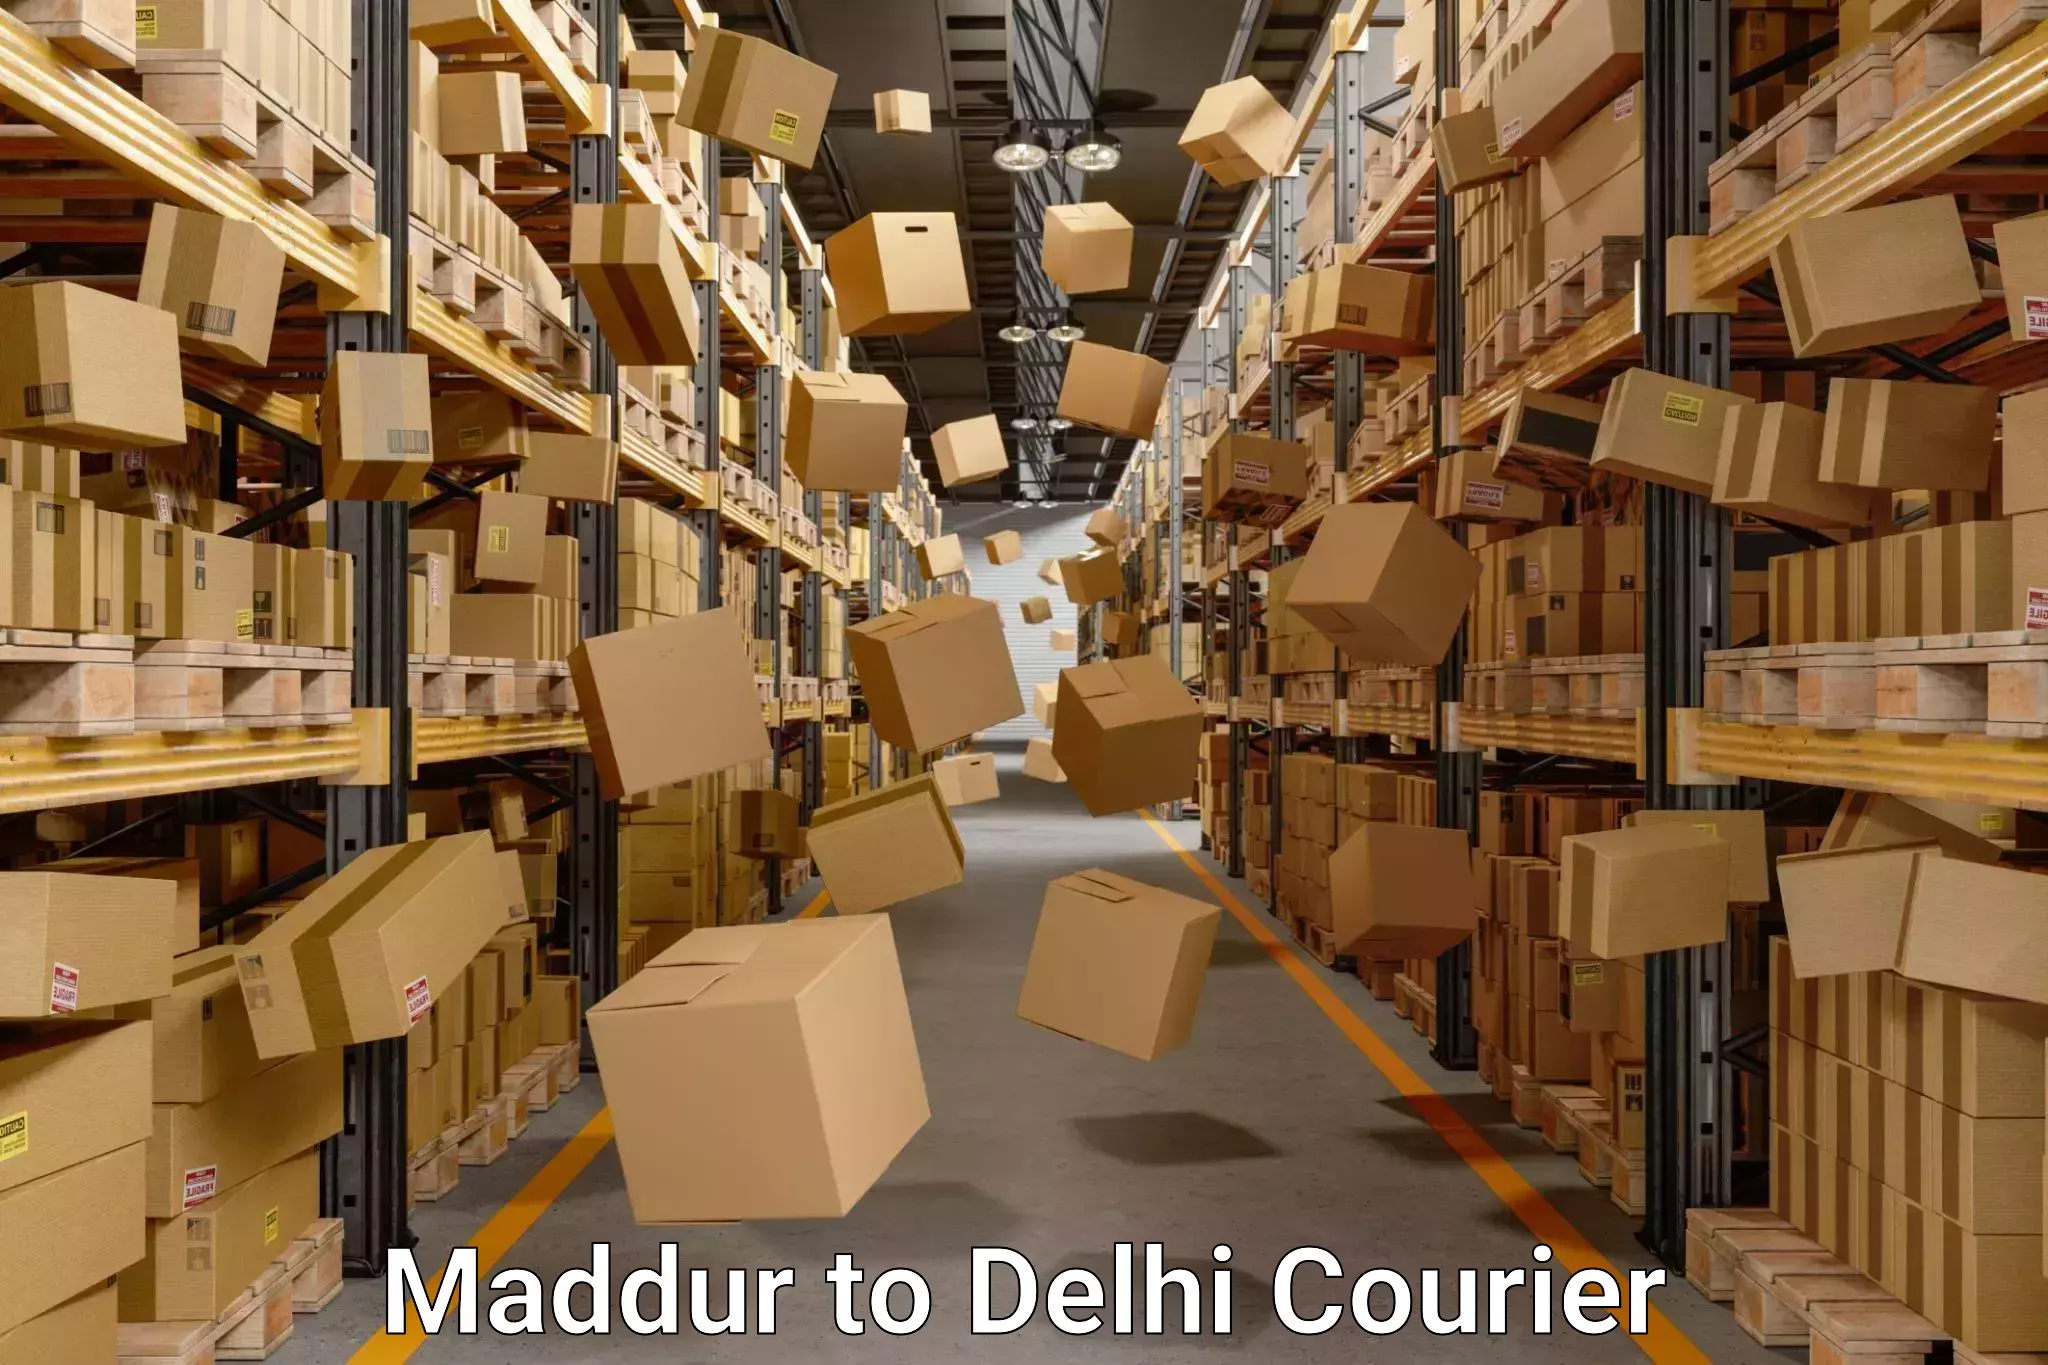 Trusted household movers Maddur to Delhi